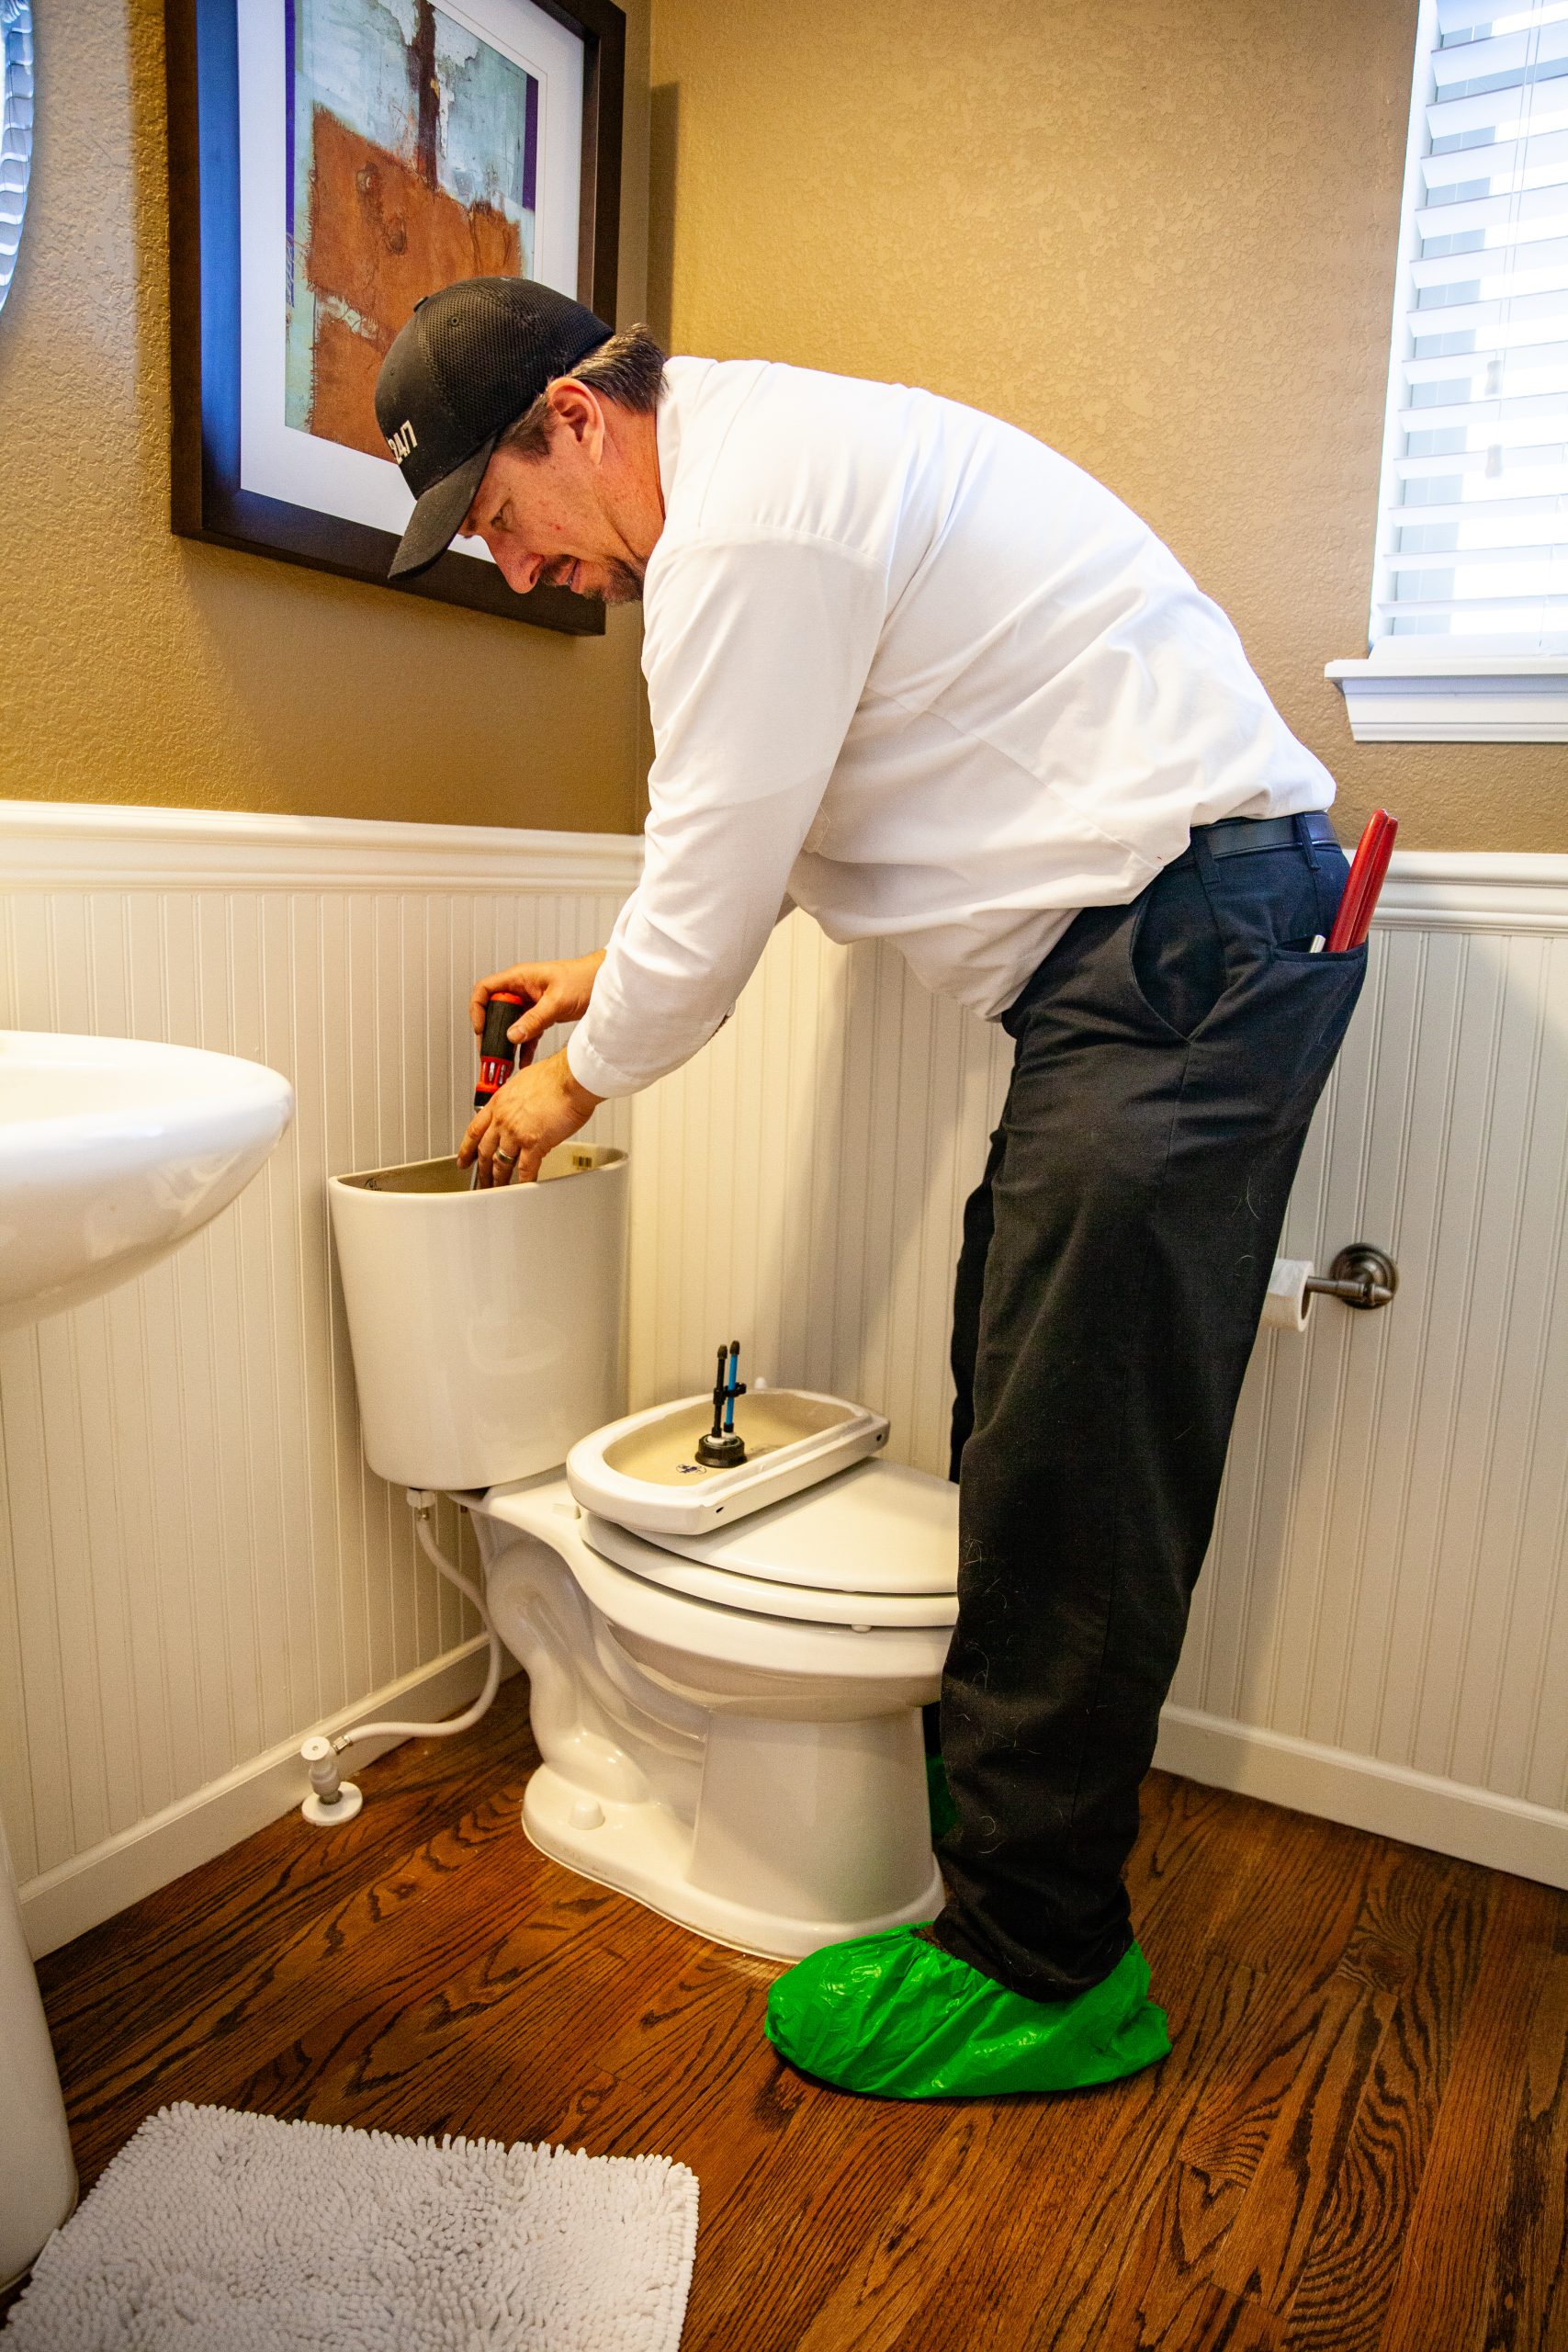 Toilet Repair & Installation in Golden, CO from Fix-it 24/7 Plumbing, Heating, Air & Electric